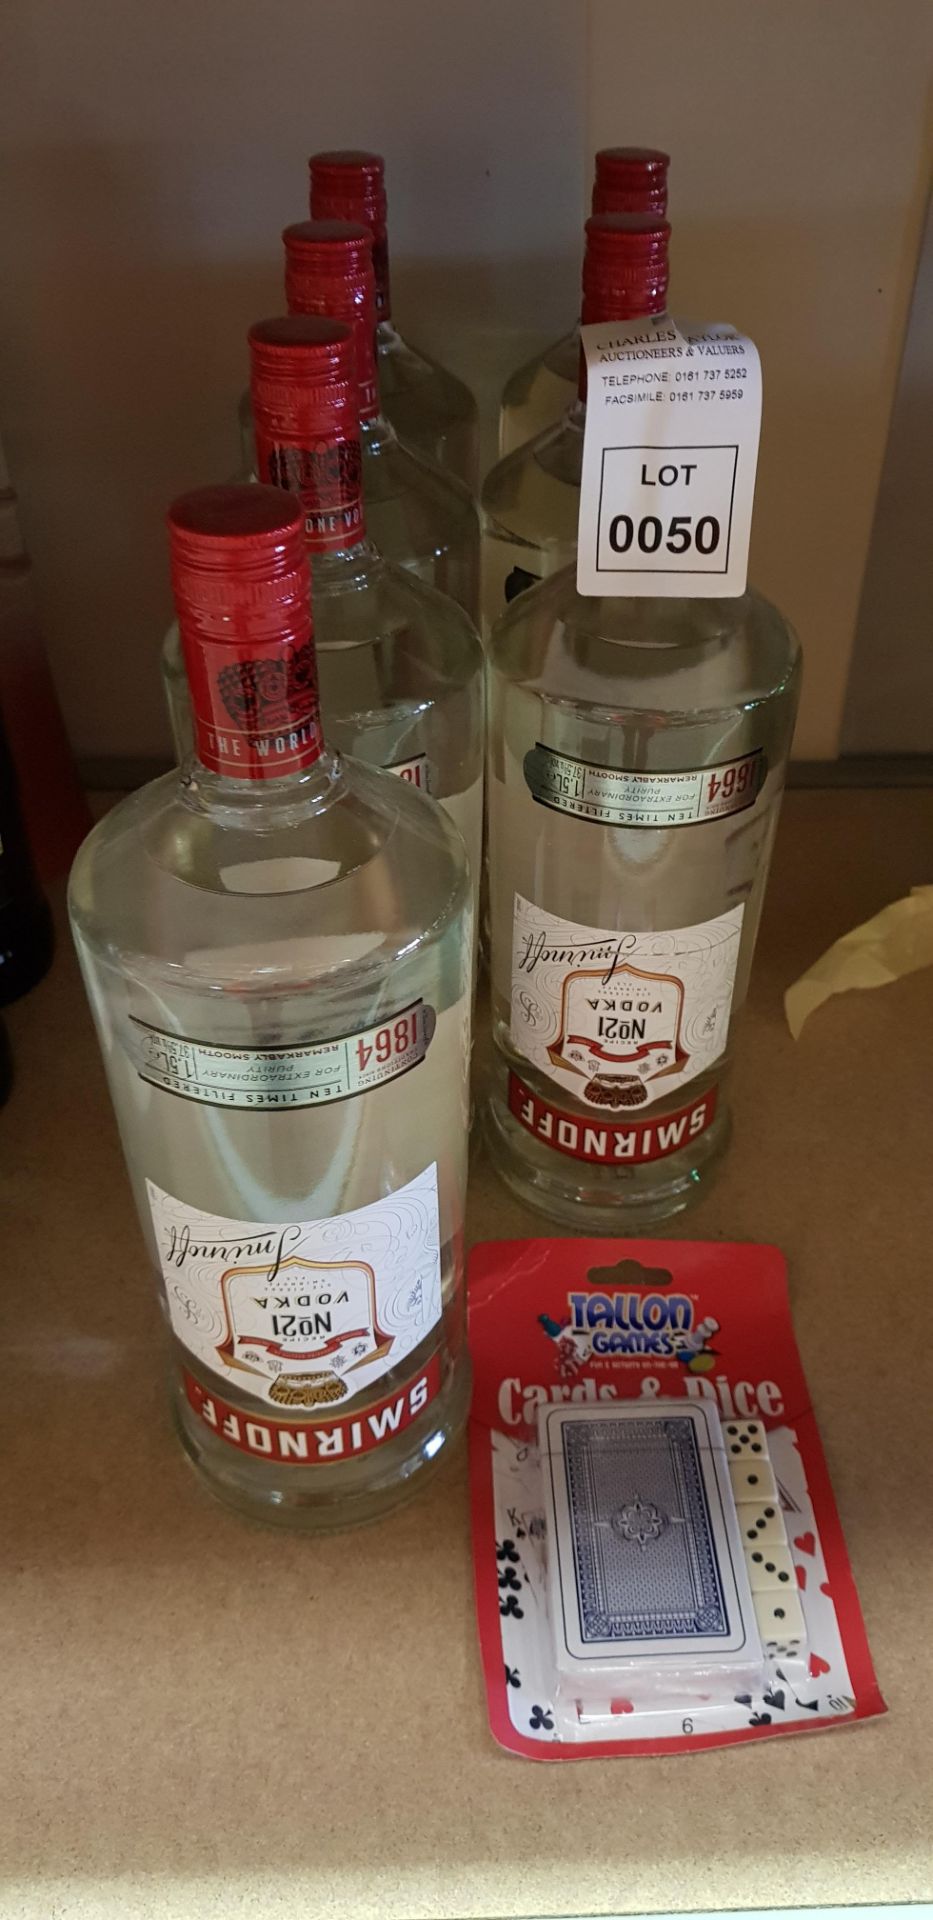 7 X BRAND NEW SMIRNOFF VODKA 1.5 LITRES - DECK OF CARDS AND DICE